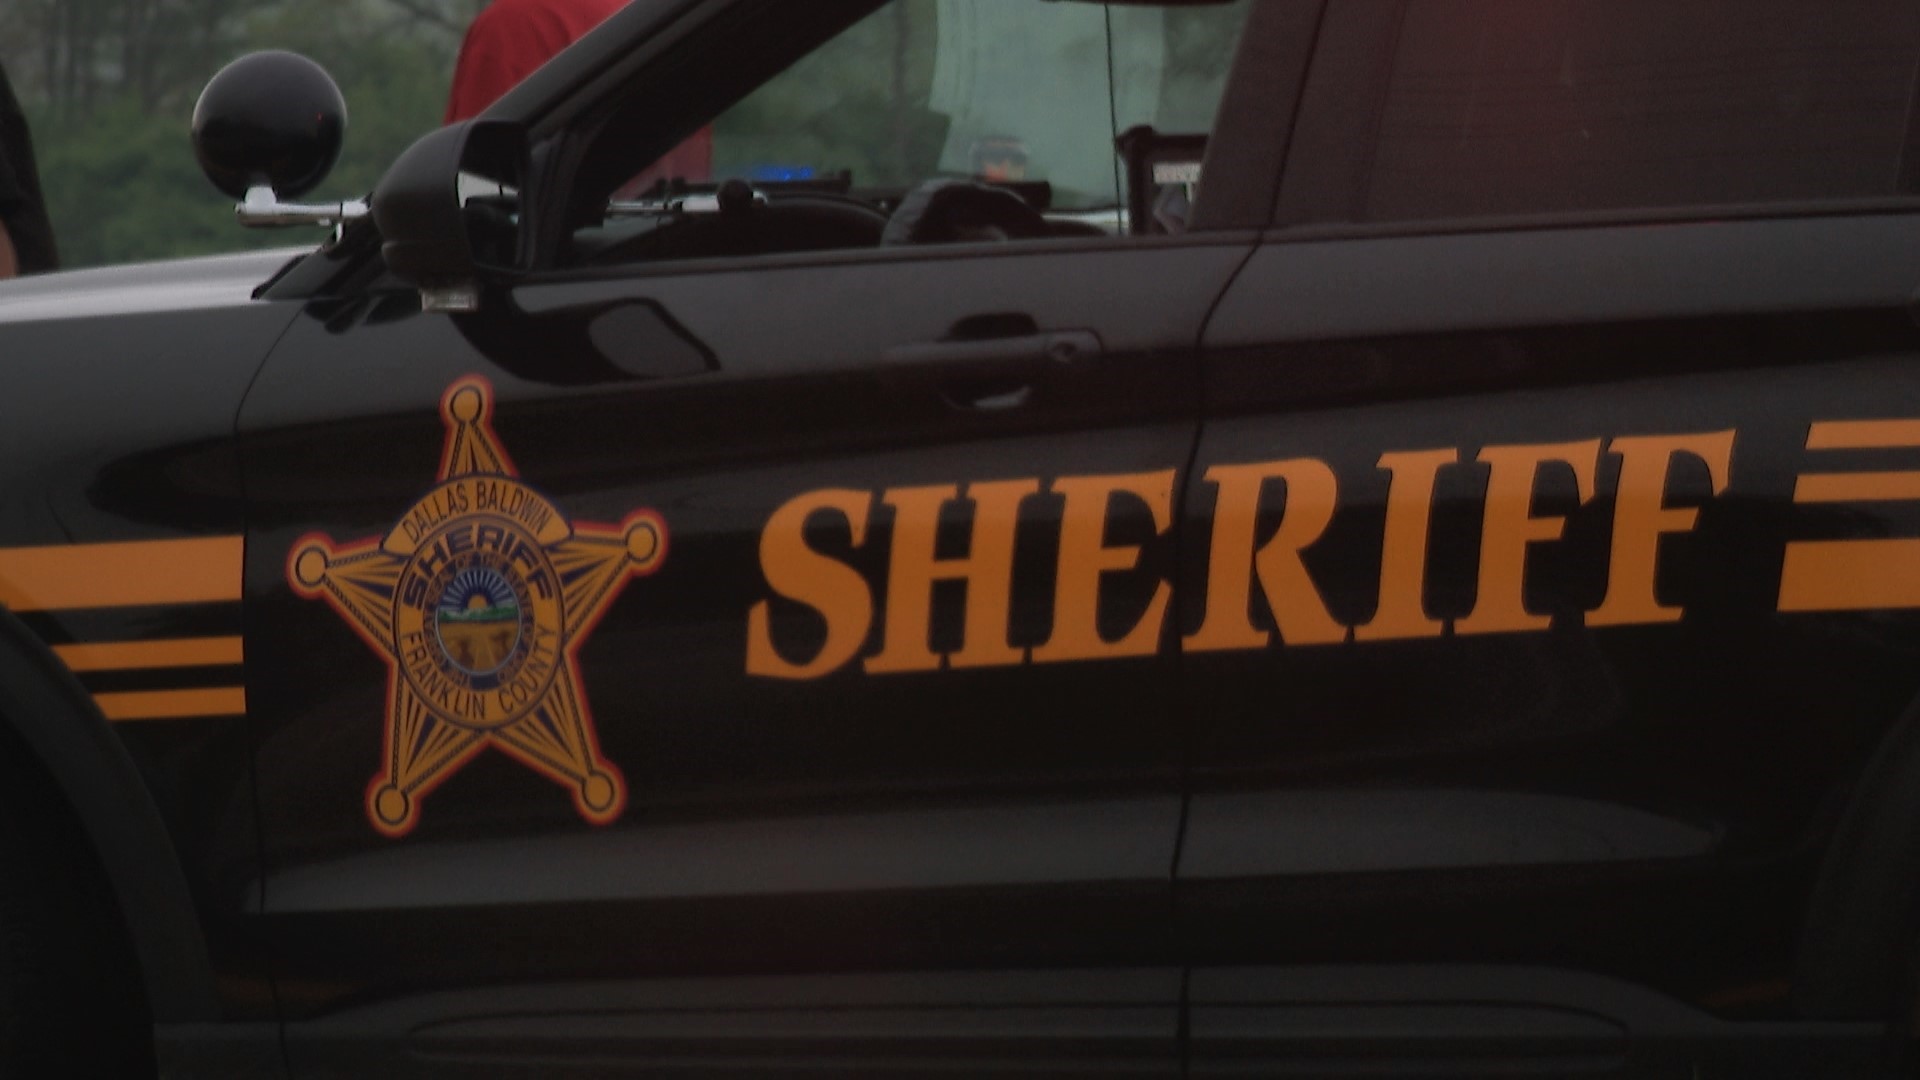 One person was killed in a head-on crash with a semitrailer near Grove City Wednesday morning, according to the Franklin County Sheriff's Office.